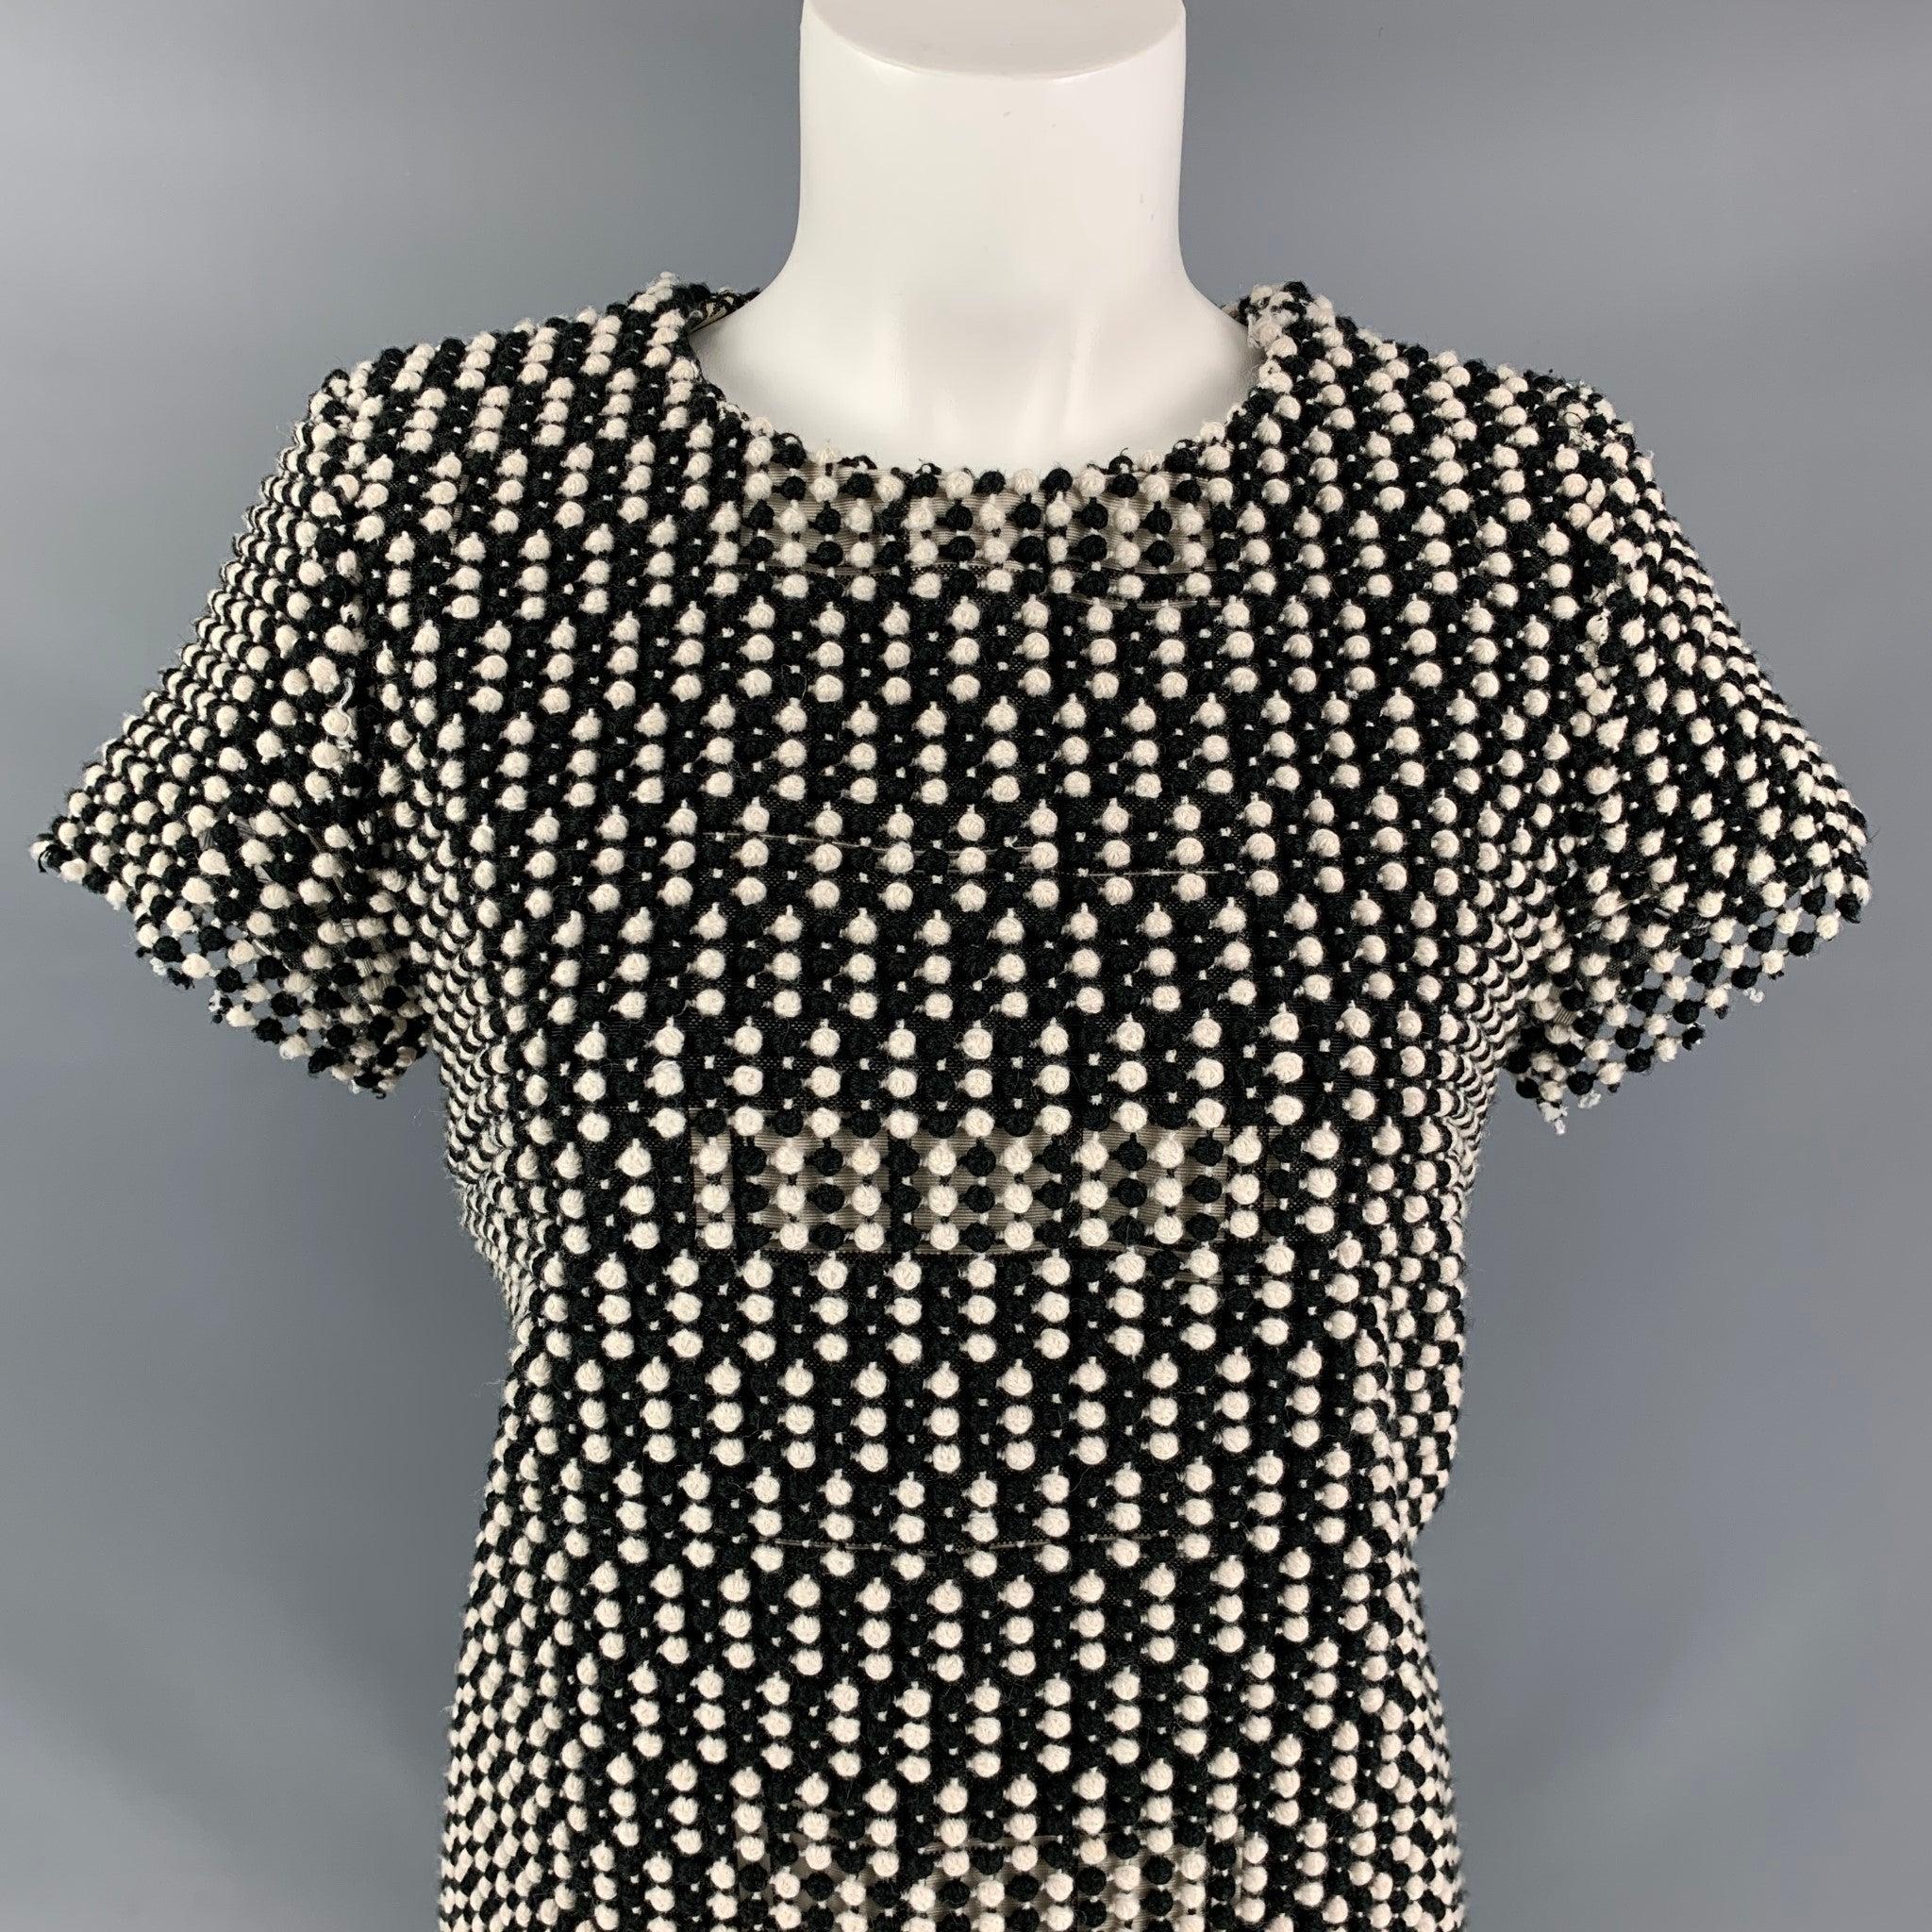 BLACK FLEECE by Thom Browne below knee dress comes in black and white wool blend featuring texture all over the garment. Made in Romania
Excellent Good Pre-Owned Condition.  

Marked:   42 

Measurements: 
 
Shoulder: 14.5 inBust: 36 inWaist: 36